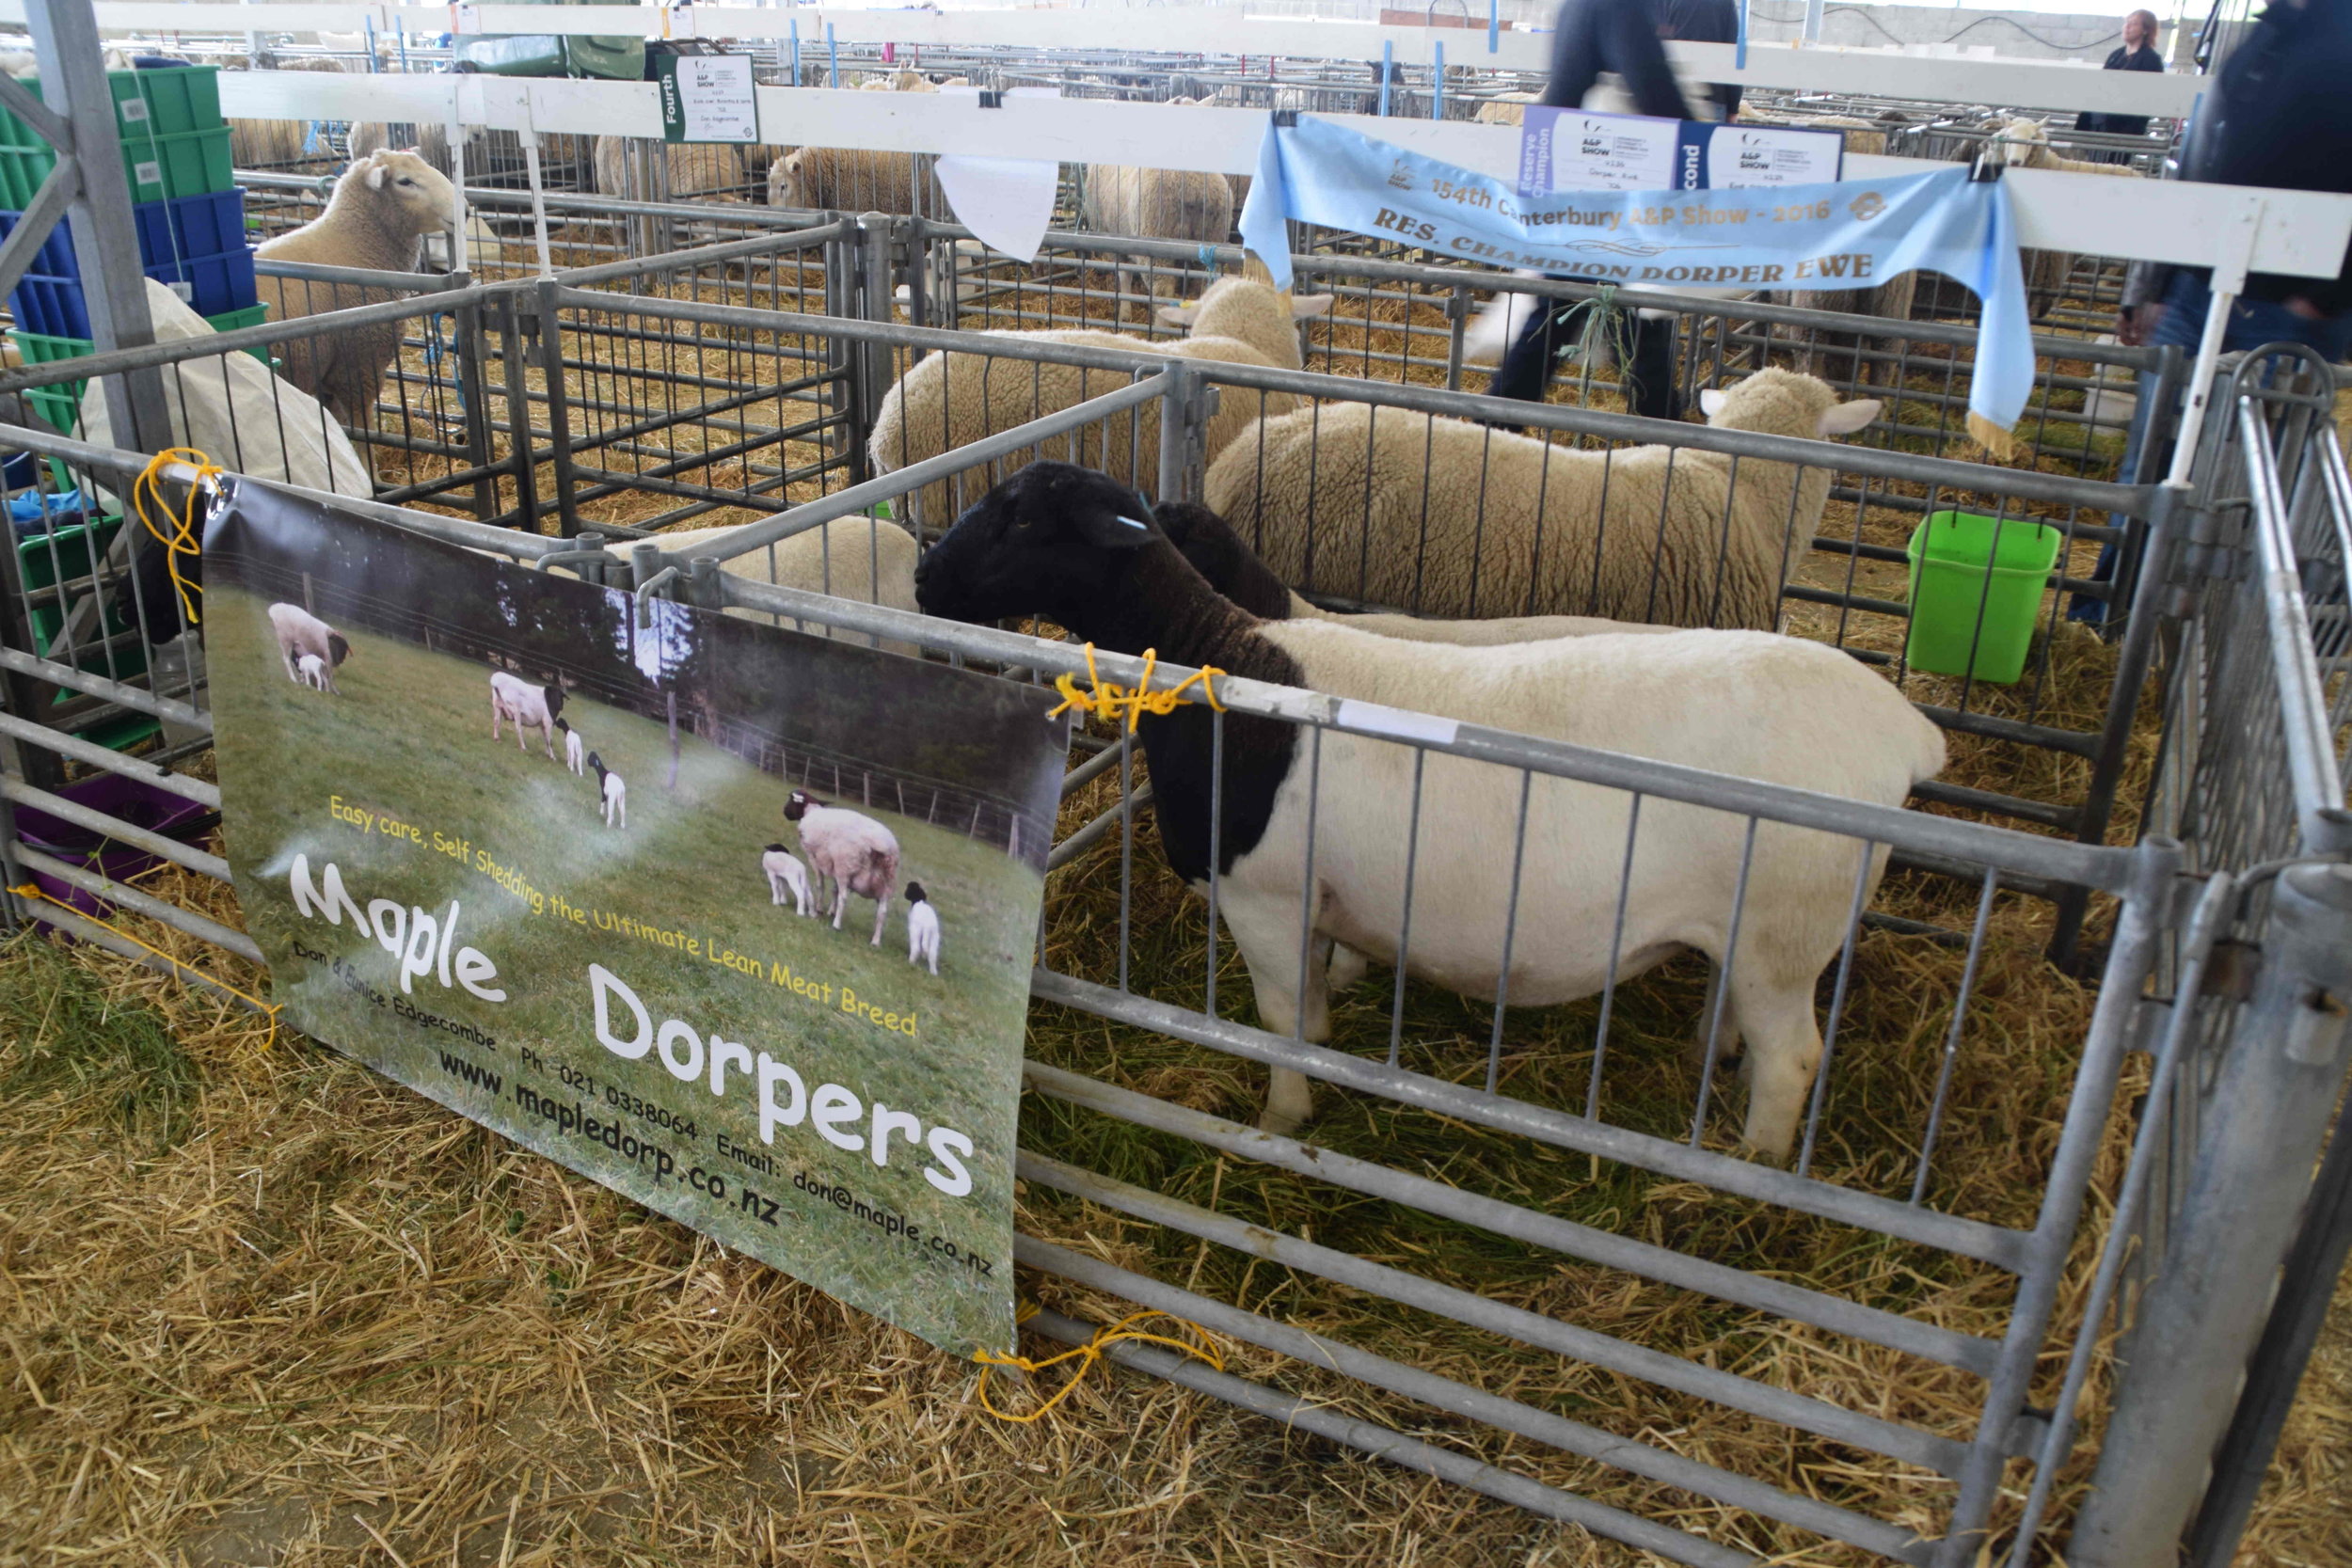  Maple Dorpers - a sheep breed known for its self shedding of wool 